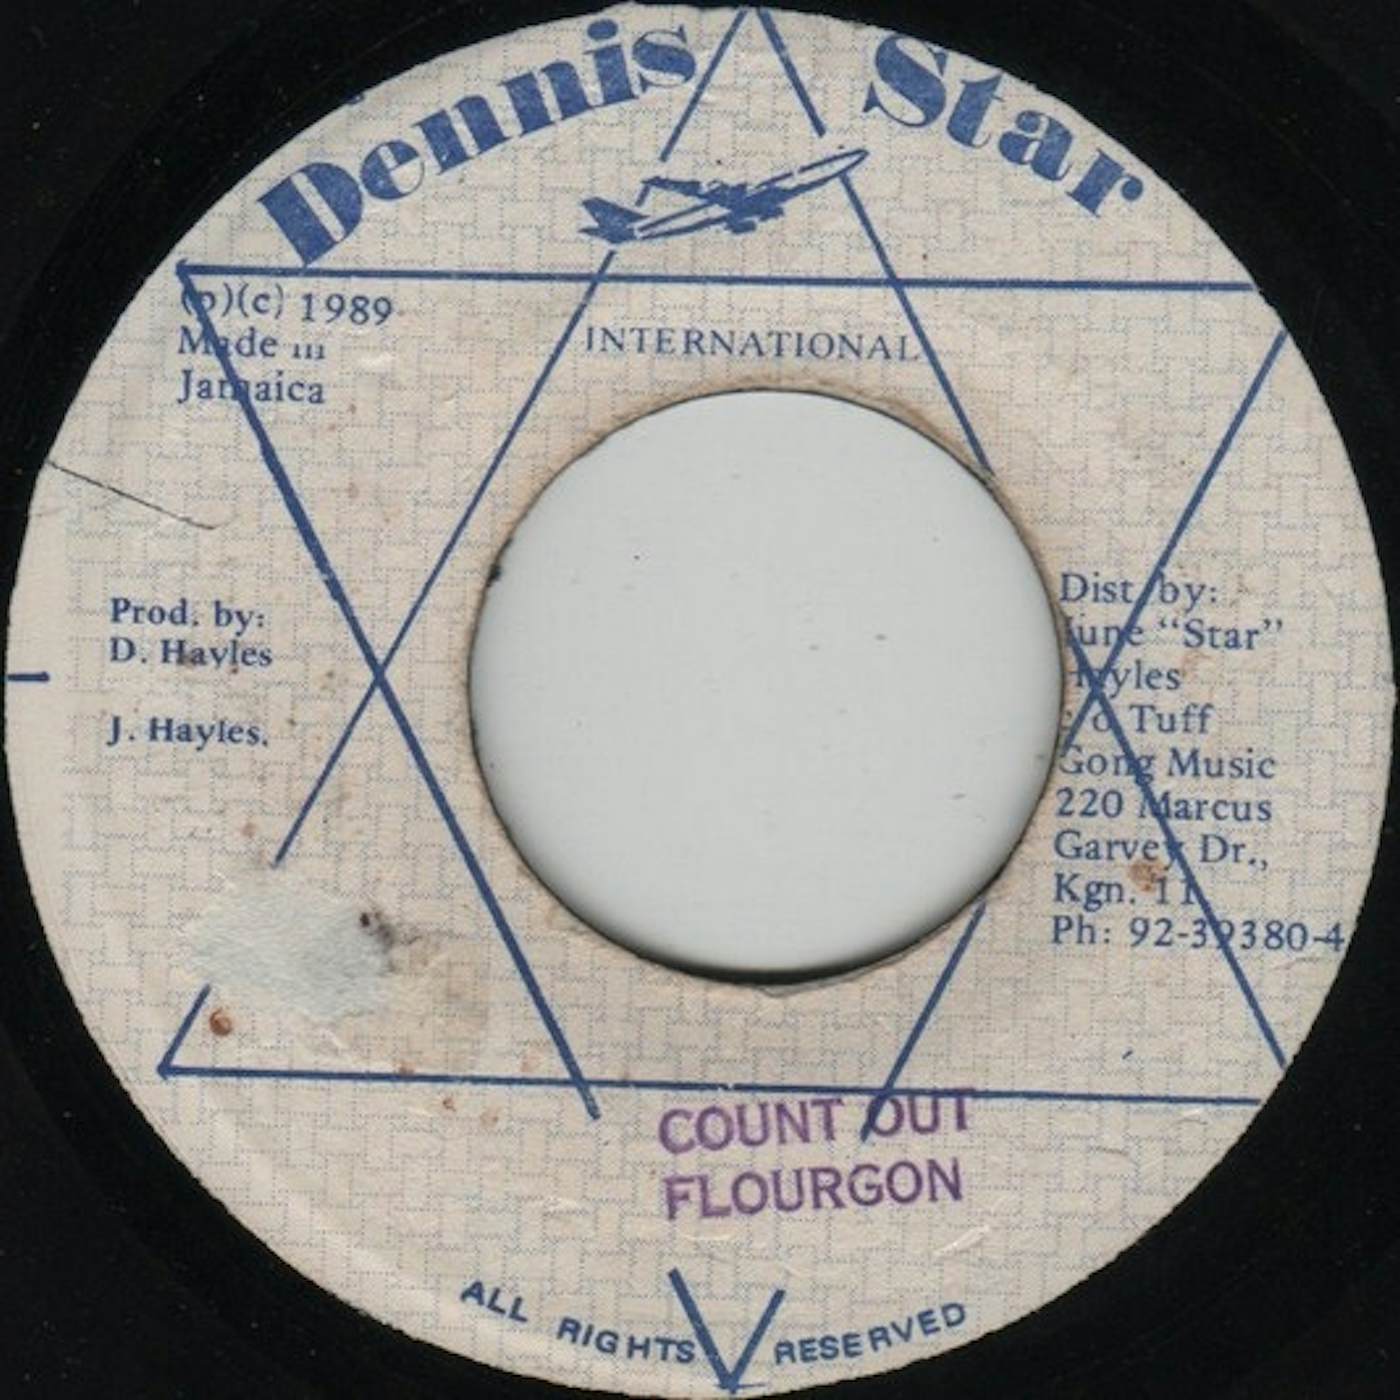 Flourgon COUNT OUT Vinyl Record